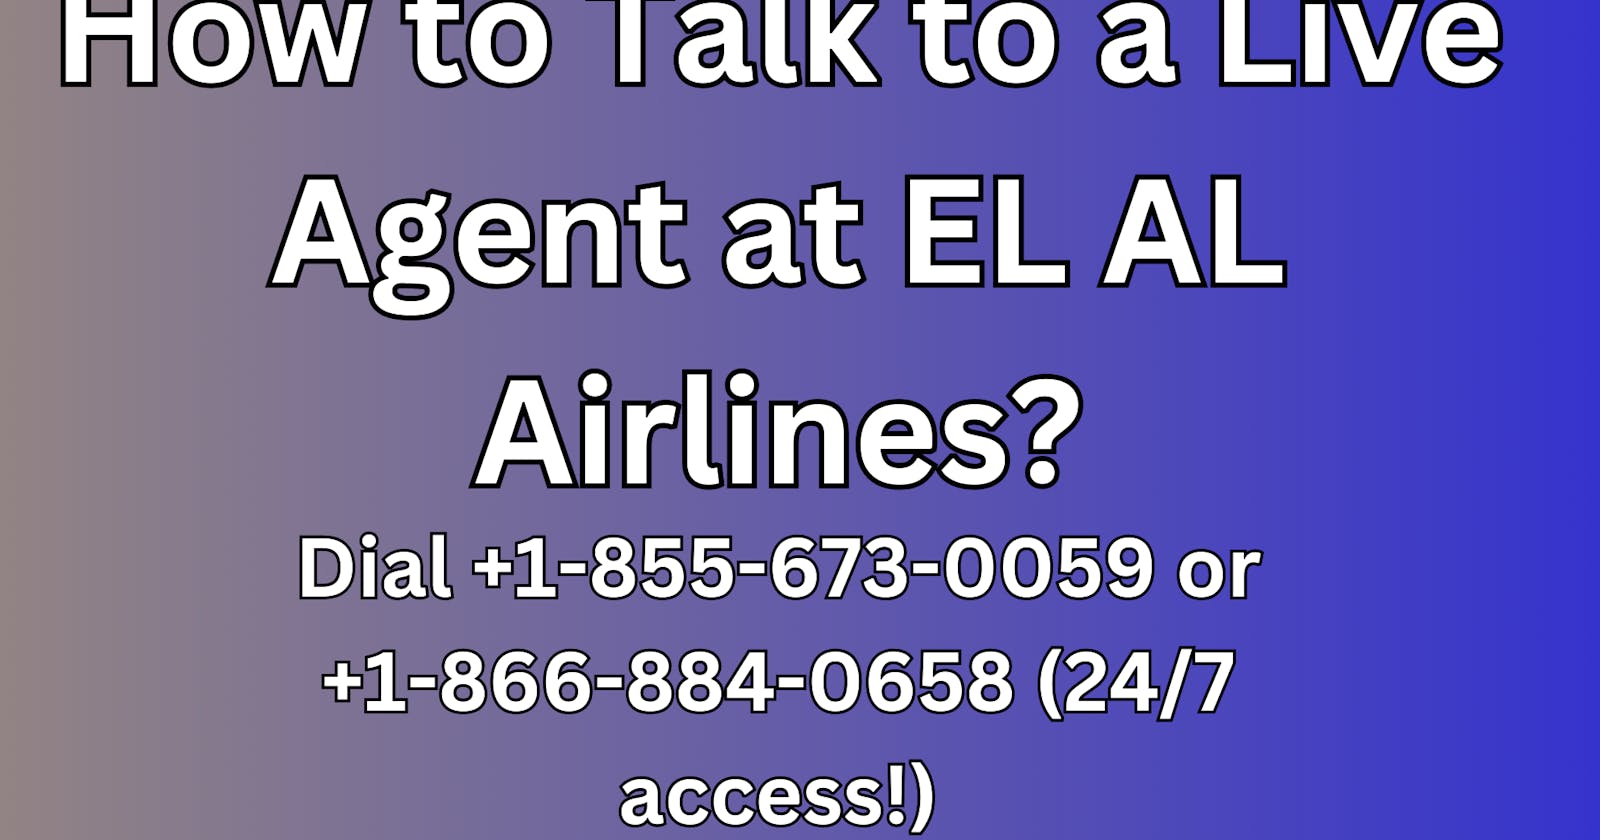 How to Talk to a Live Agent at EL AL Airlines? - Dial +1-855-673-0059 or +1-866-884-0658 (24/7 access!)